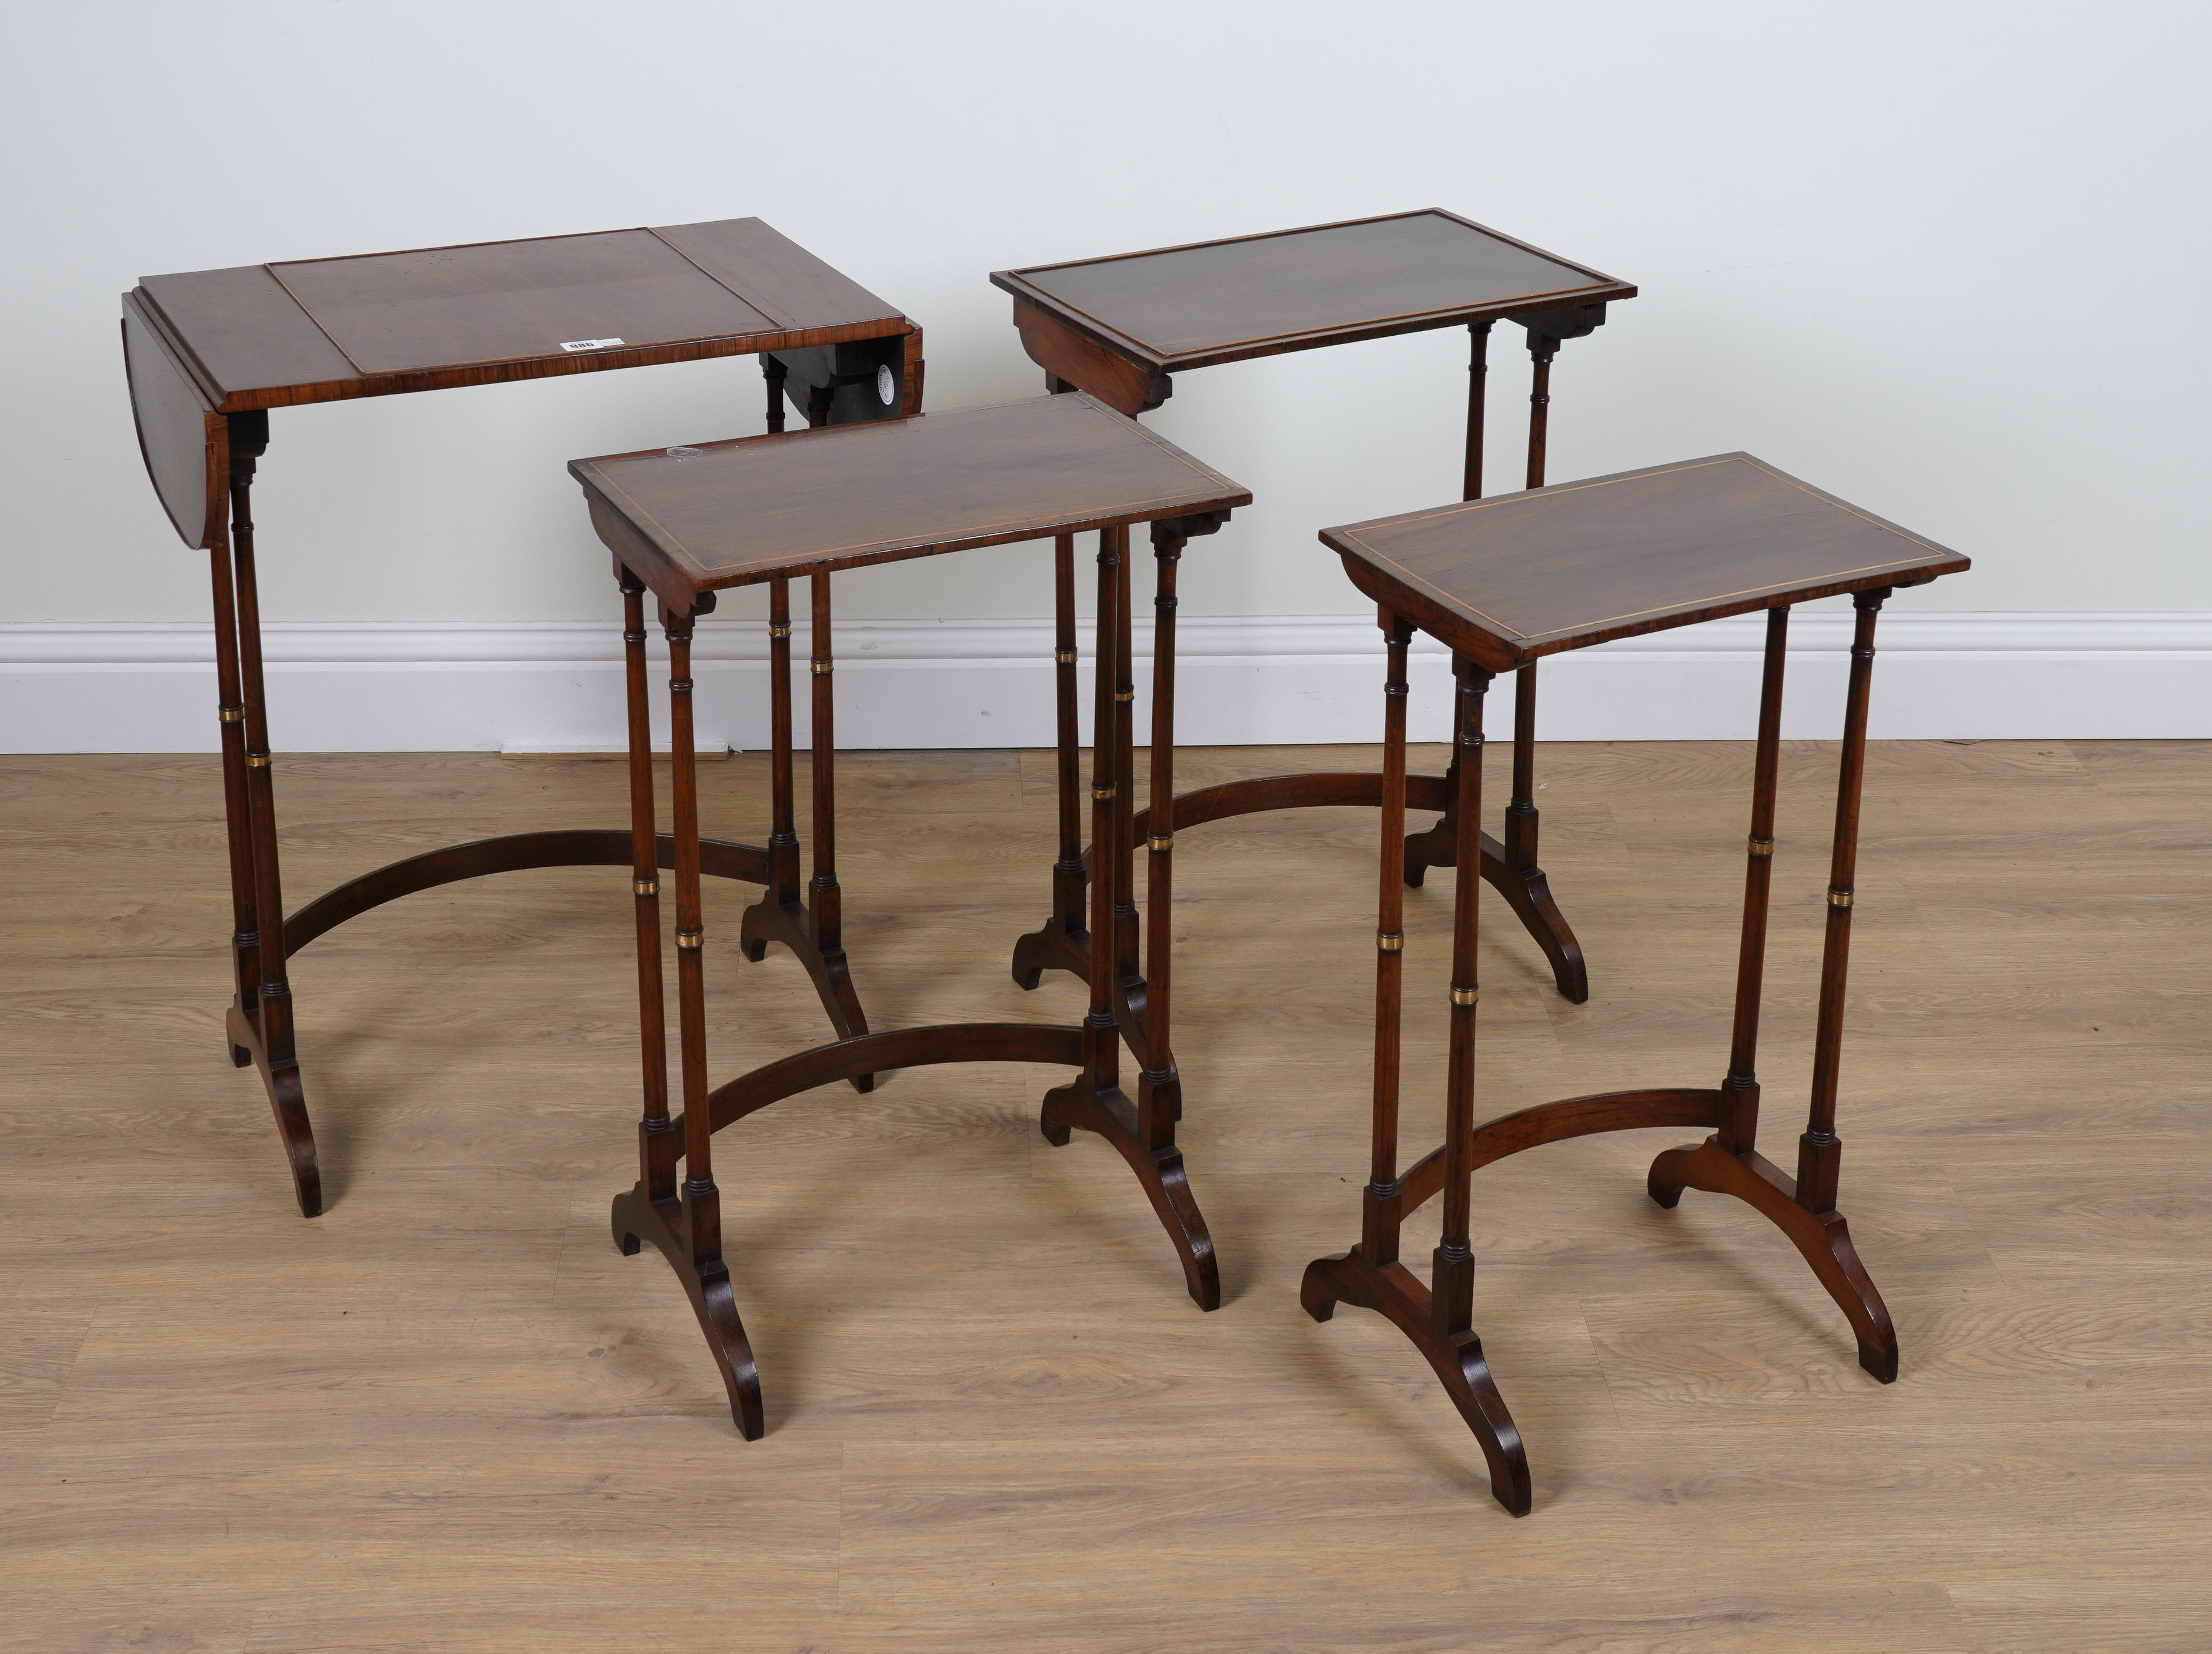 A NEST OF FOUR MID-19TH CENTURY GILT-METAL MOUNTED ROSEWOOD OCCASIONAL TABLES (4) - Image 3 of 3